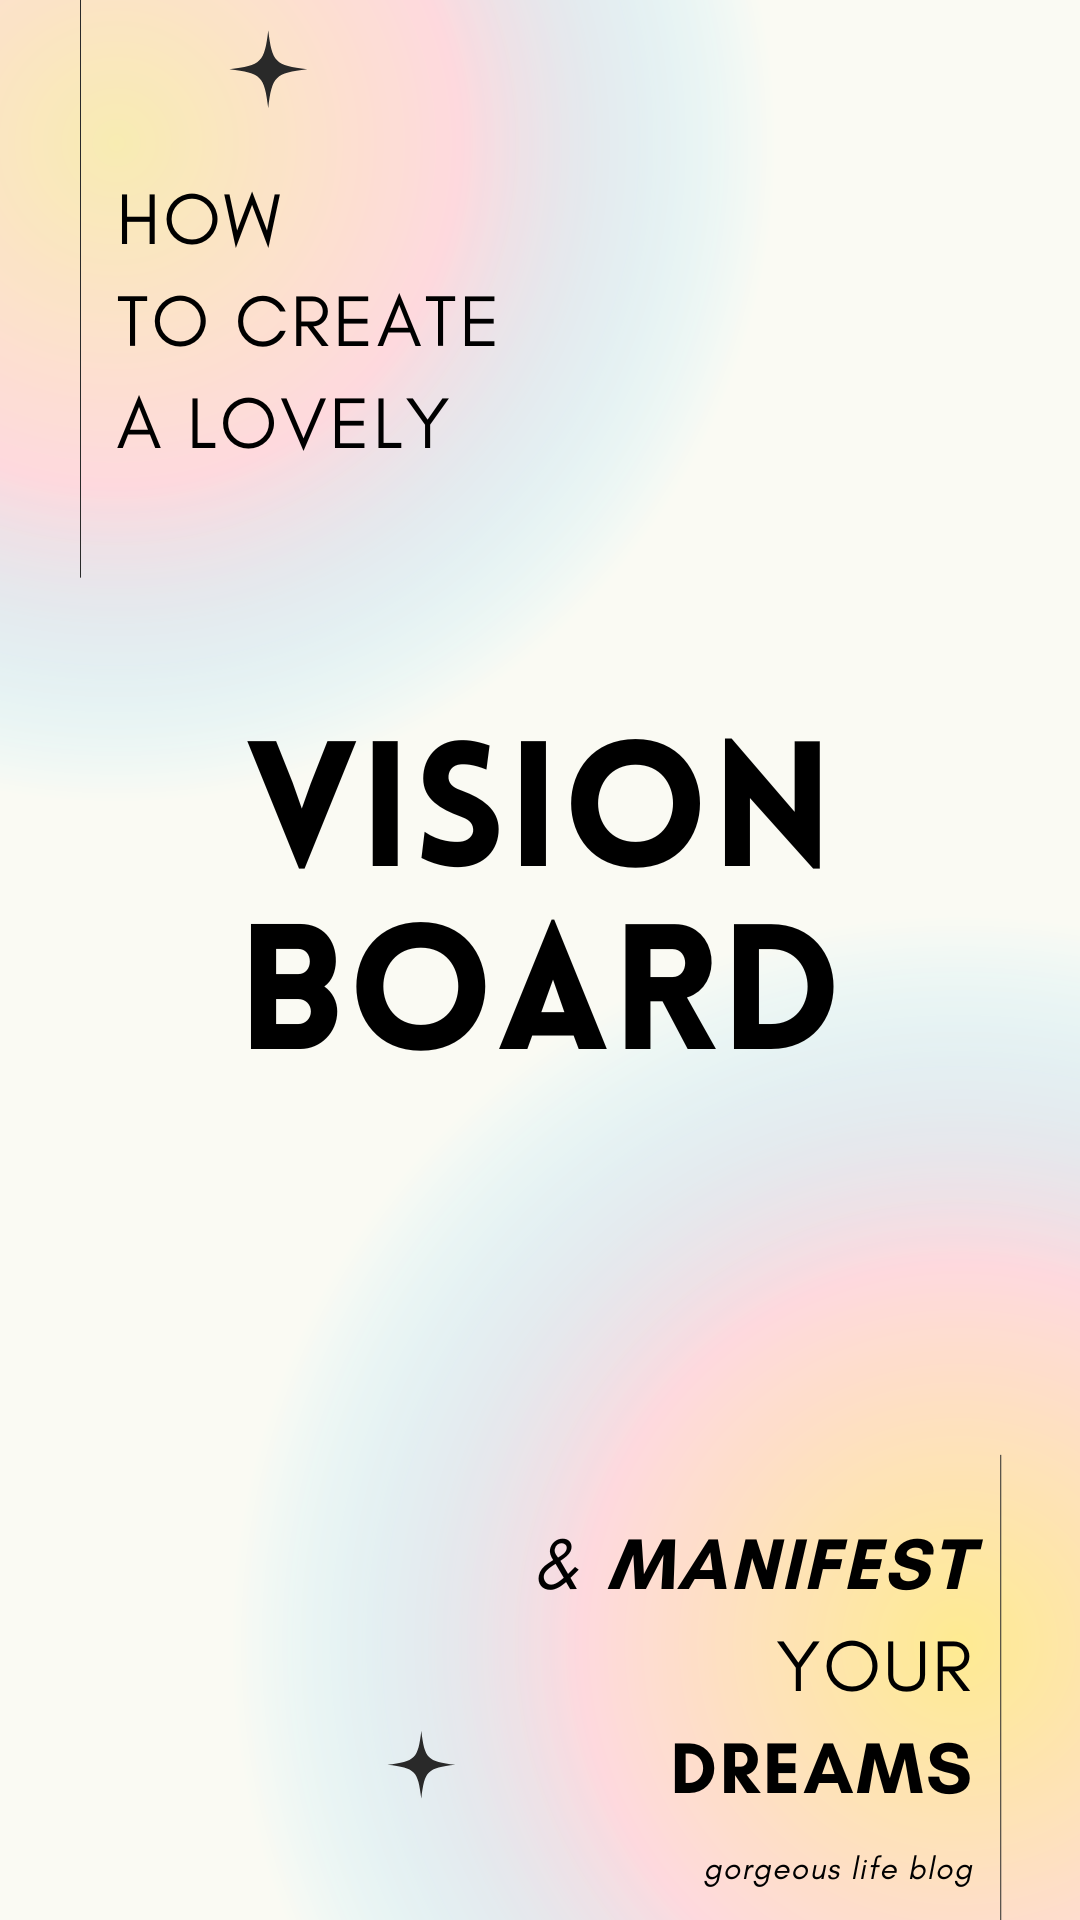 How to create a vision board - The Gorgeous Life